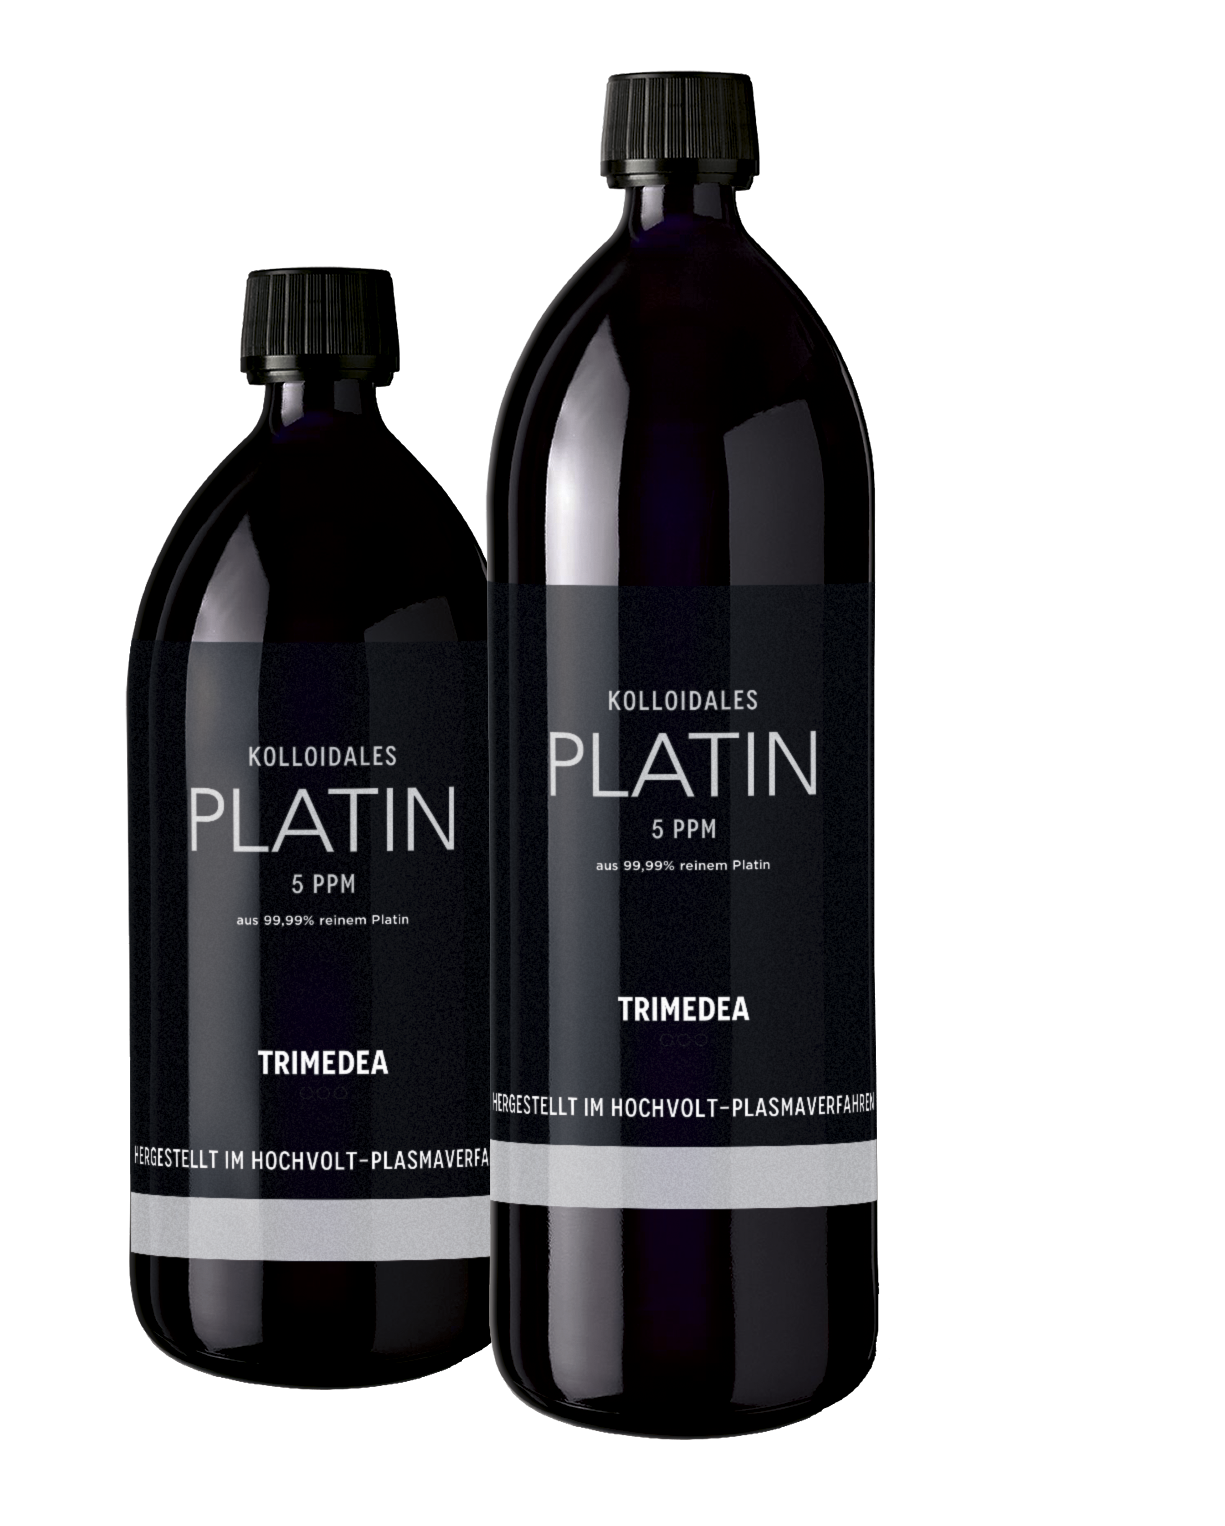 Colloidal platinum - real colloids bioavailable and effective